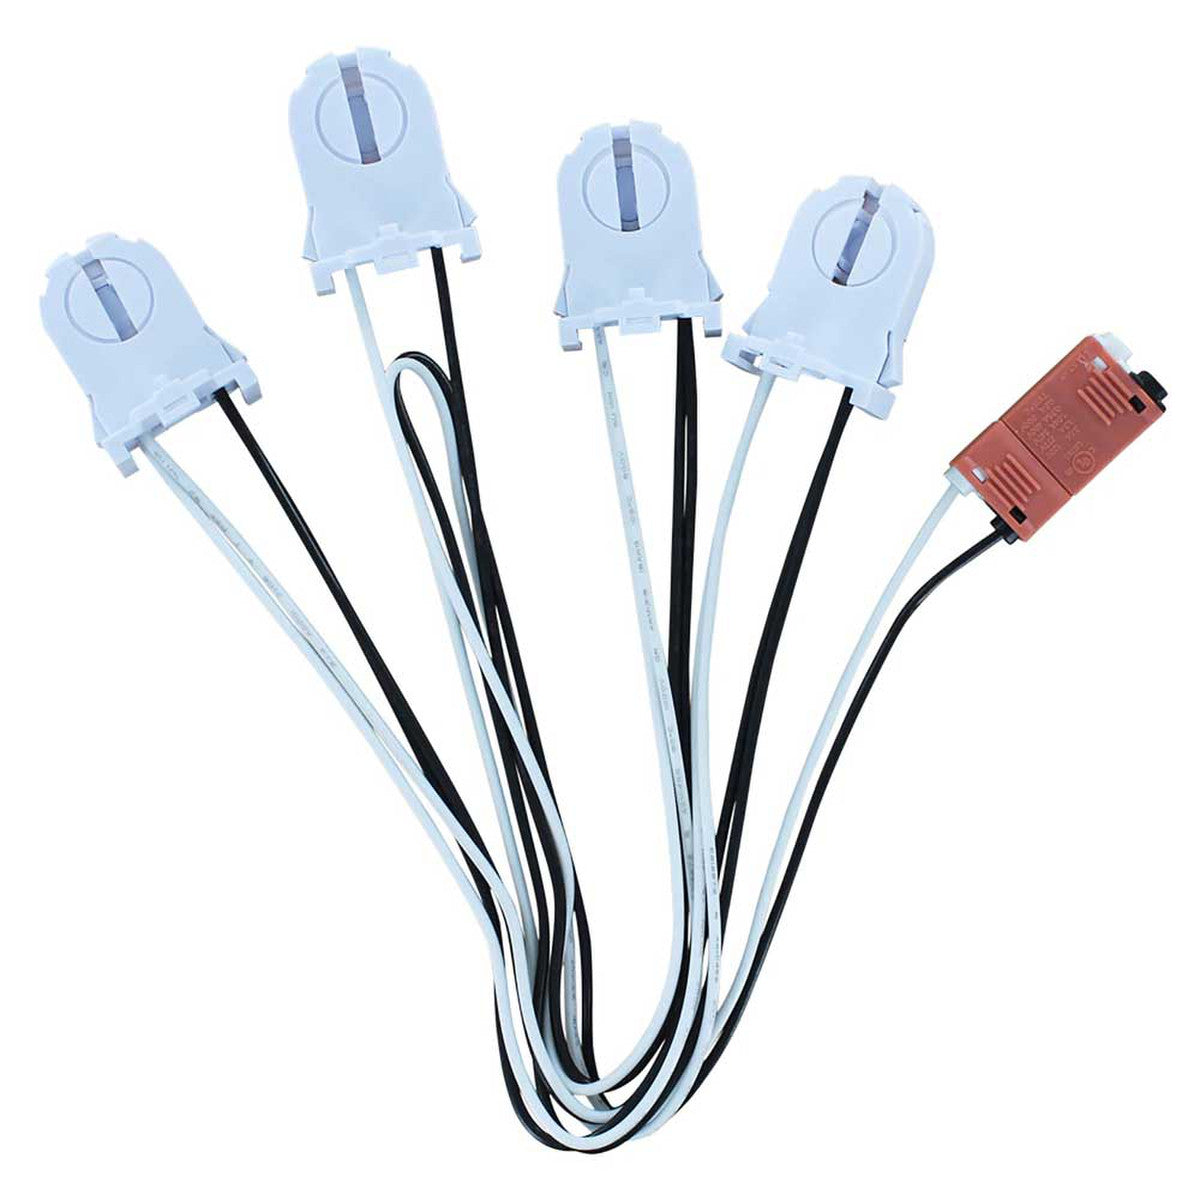 GLT GLT-SOCKET-T8-U-S-4-W 4-Lamp Wiring Harness with Short Non-shunted Sockets for LED Tubes